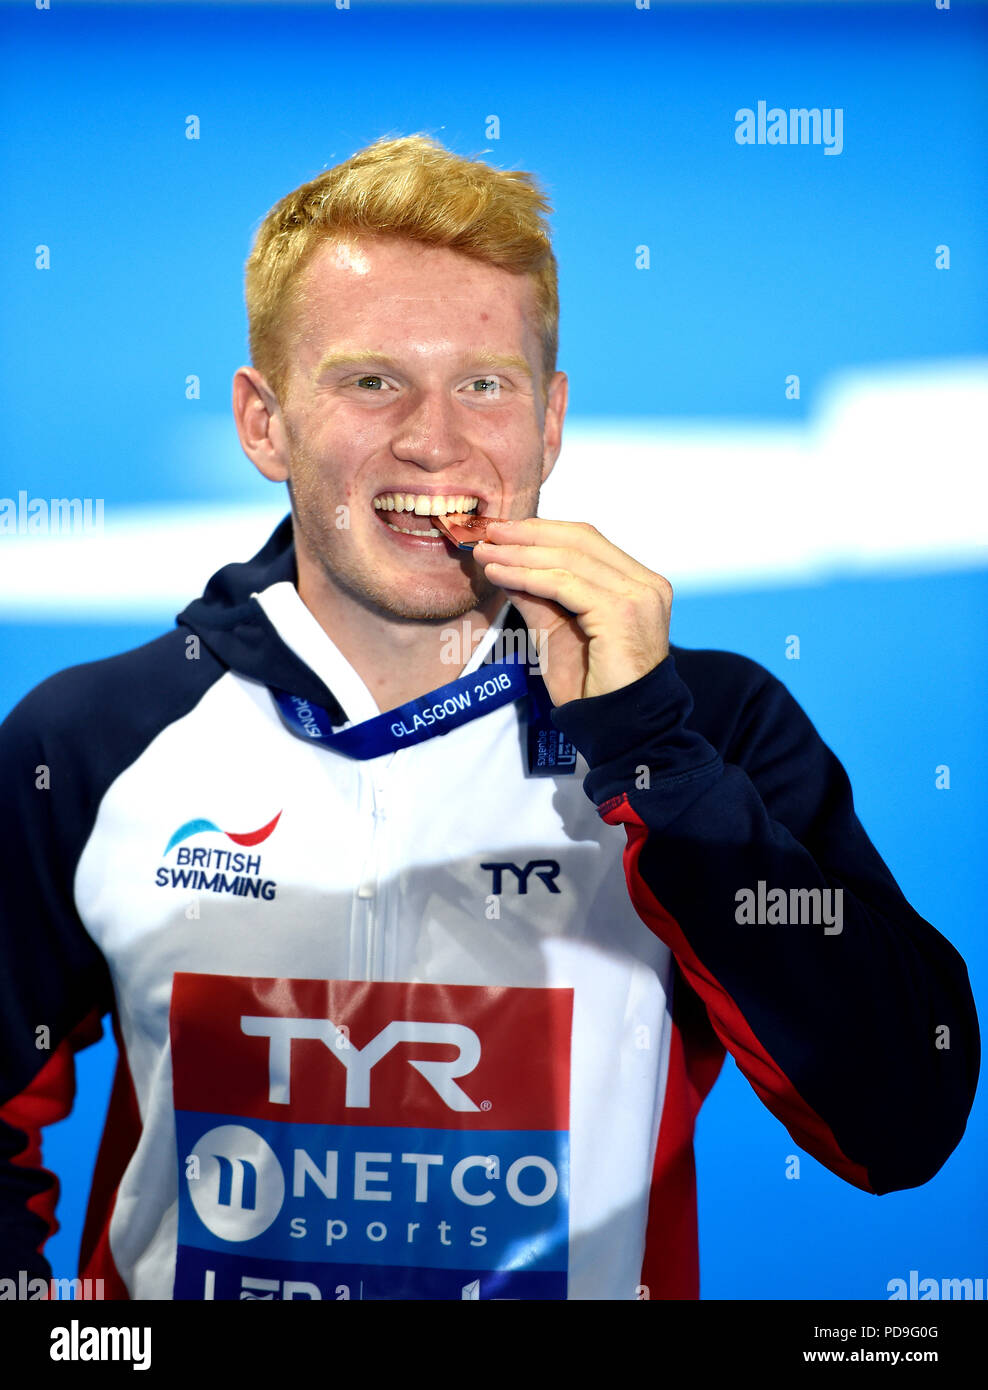 Great Britain's James Heatly celebrates with his bronze medal in the Men's 1m Springboard Final during day six of the 2018 European Championships at Scotstoun Sports Campus, Glasgow. Stock Photo